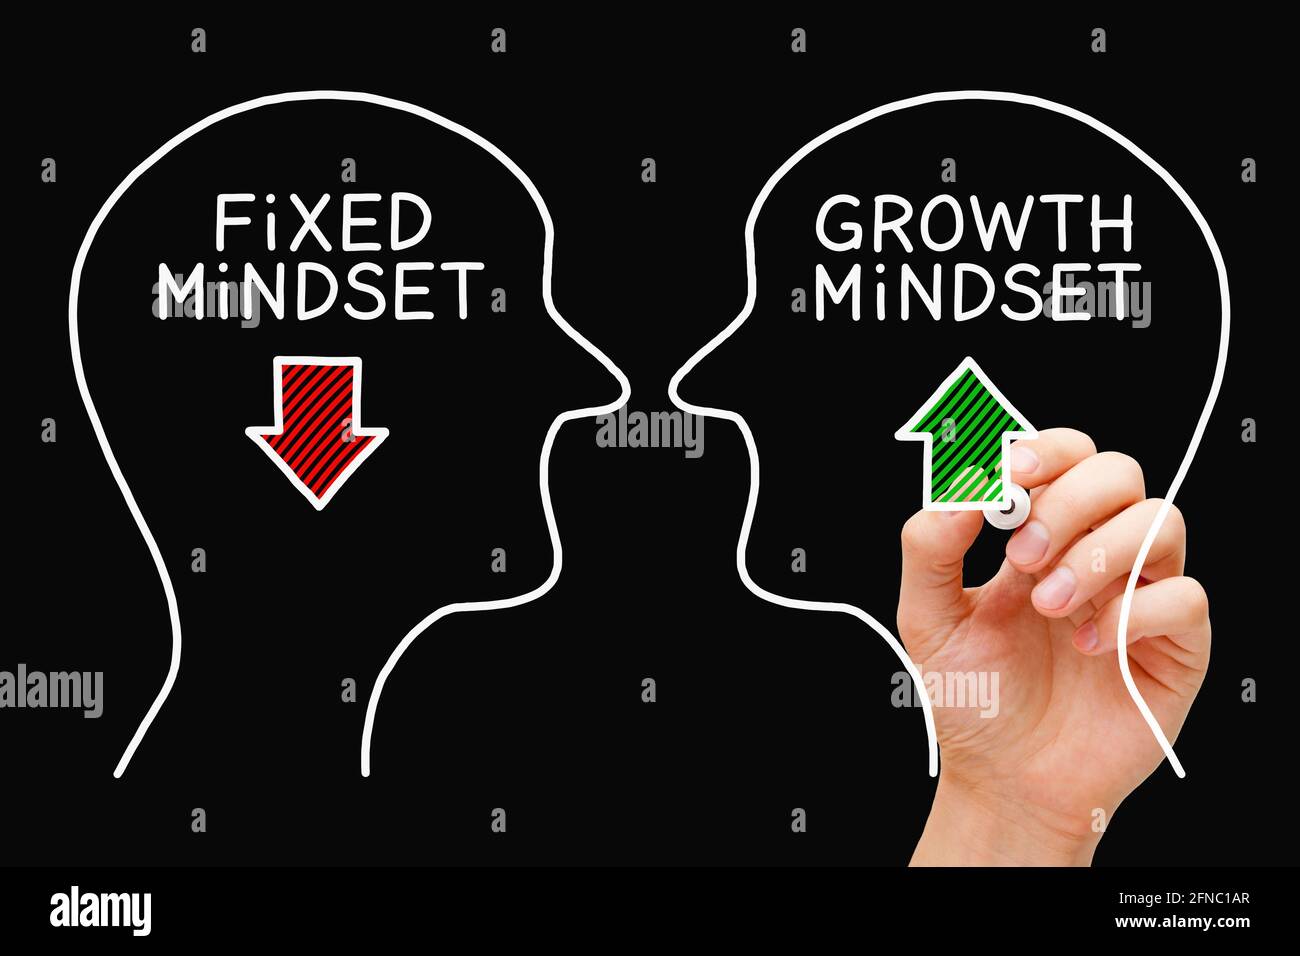 Hand drawing Growth Mindset against Fixed Mindset concept on blackboard. Stock Photo